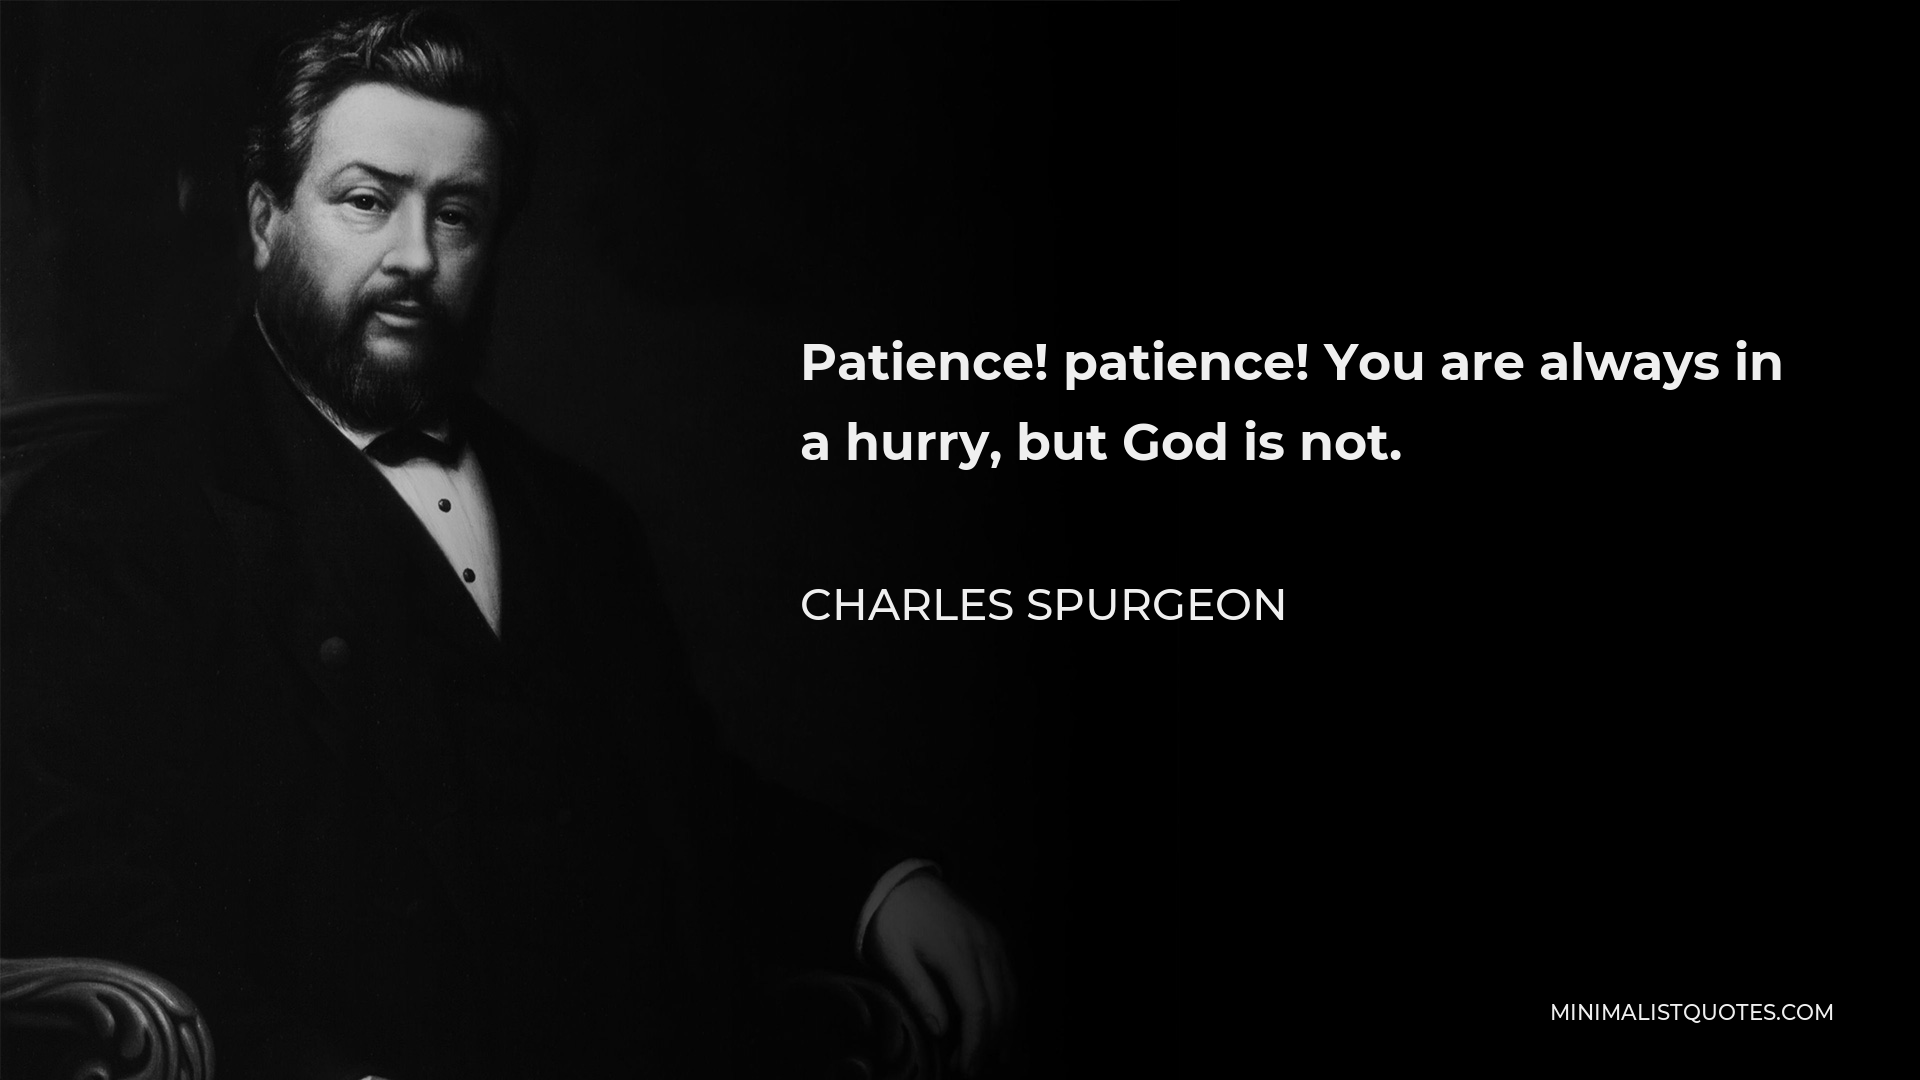 Charles Spurgeon Quote - Patience! patience! You are always in a hurry, but God is not.